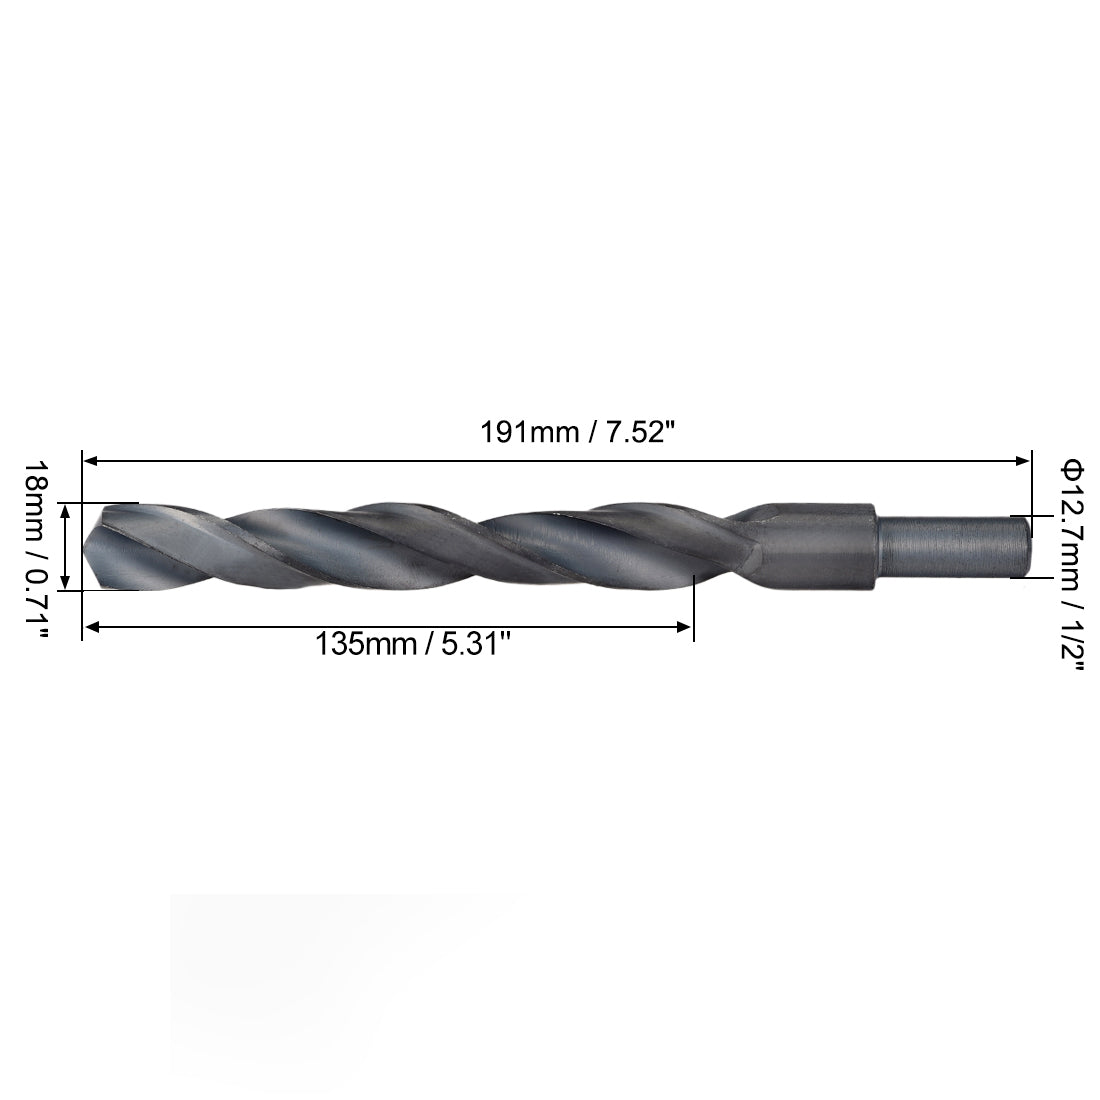 Uxcell Uxcell Reduced Shank Twist Drill Bits 25mm HSS 4241 with 1/2 Inch Shank 1 Pcs